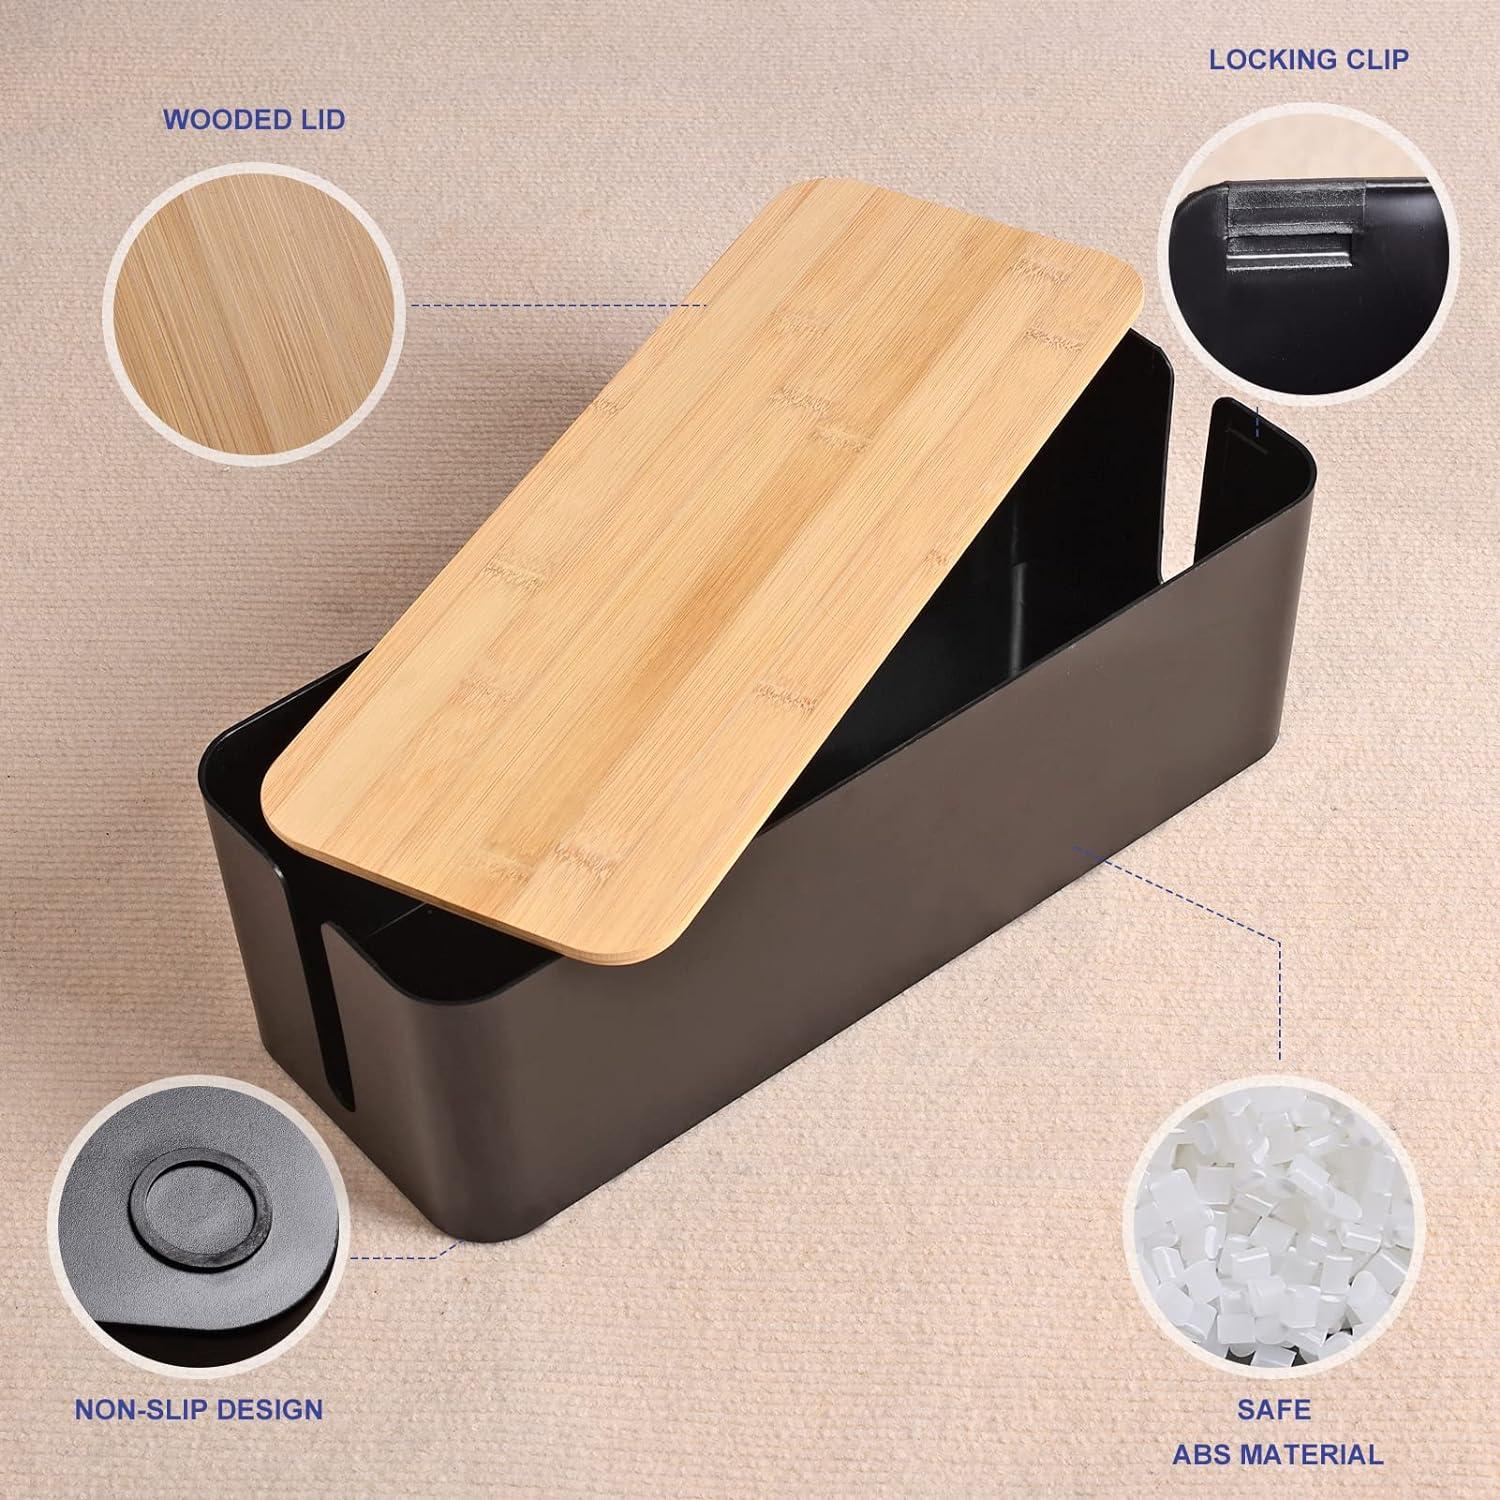 Cable Management Box - Wooden Style Cord Organizer Box to Hide